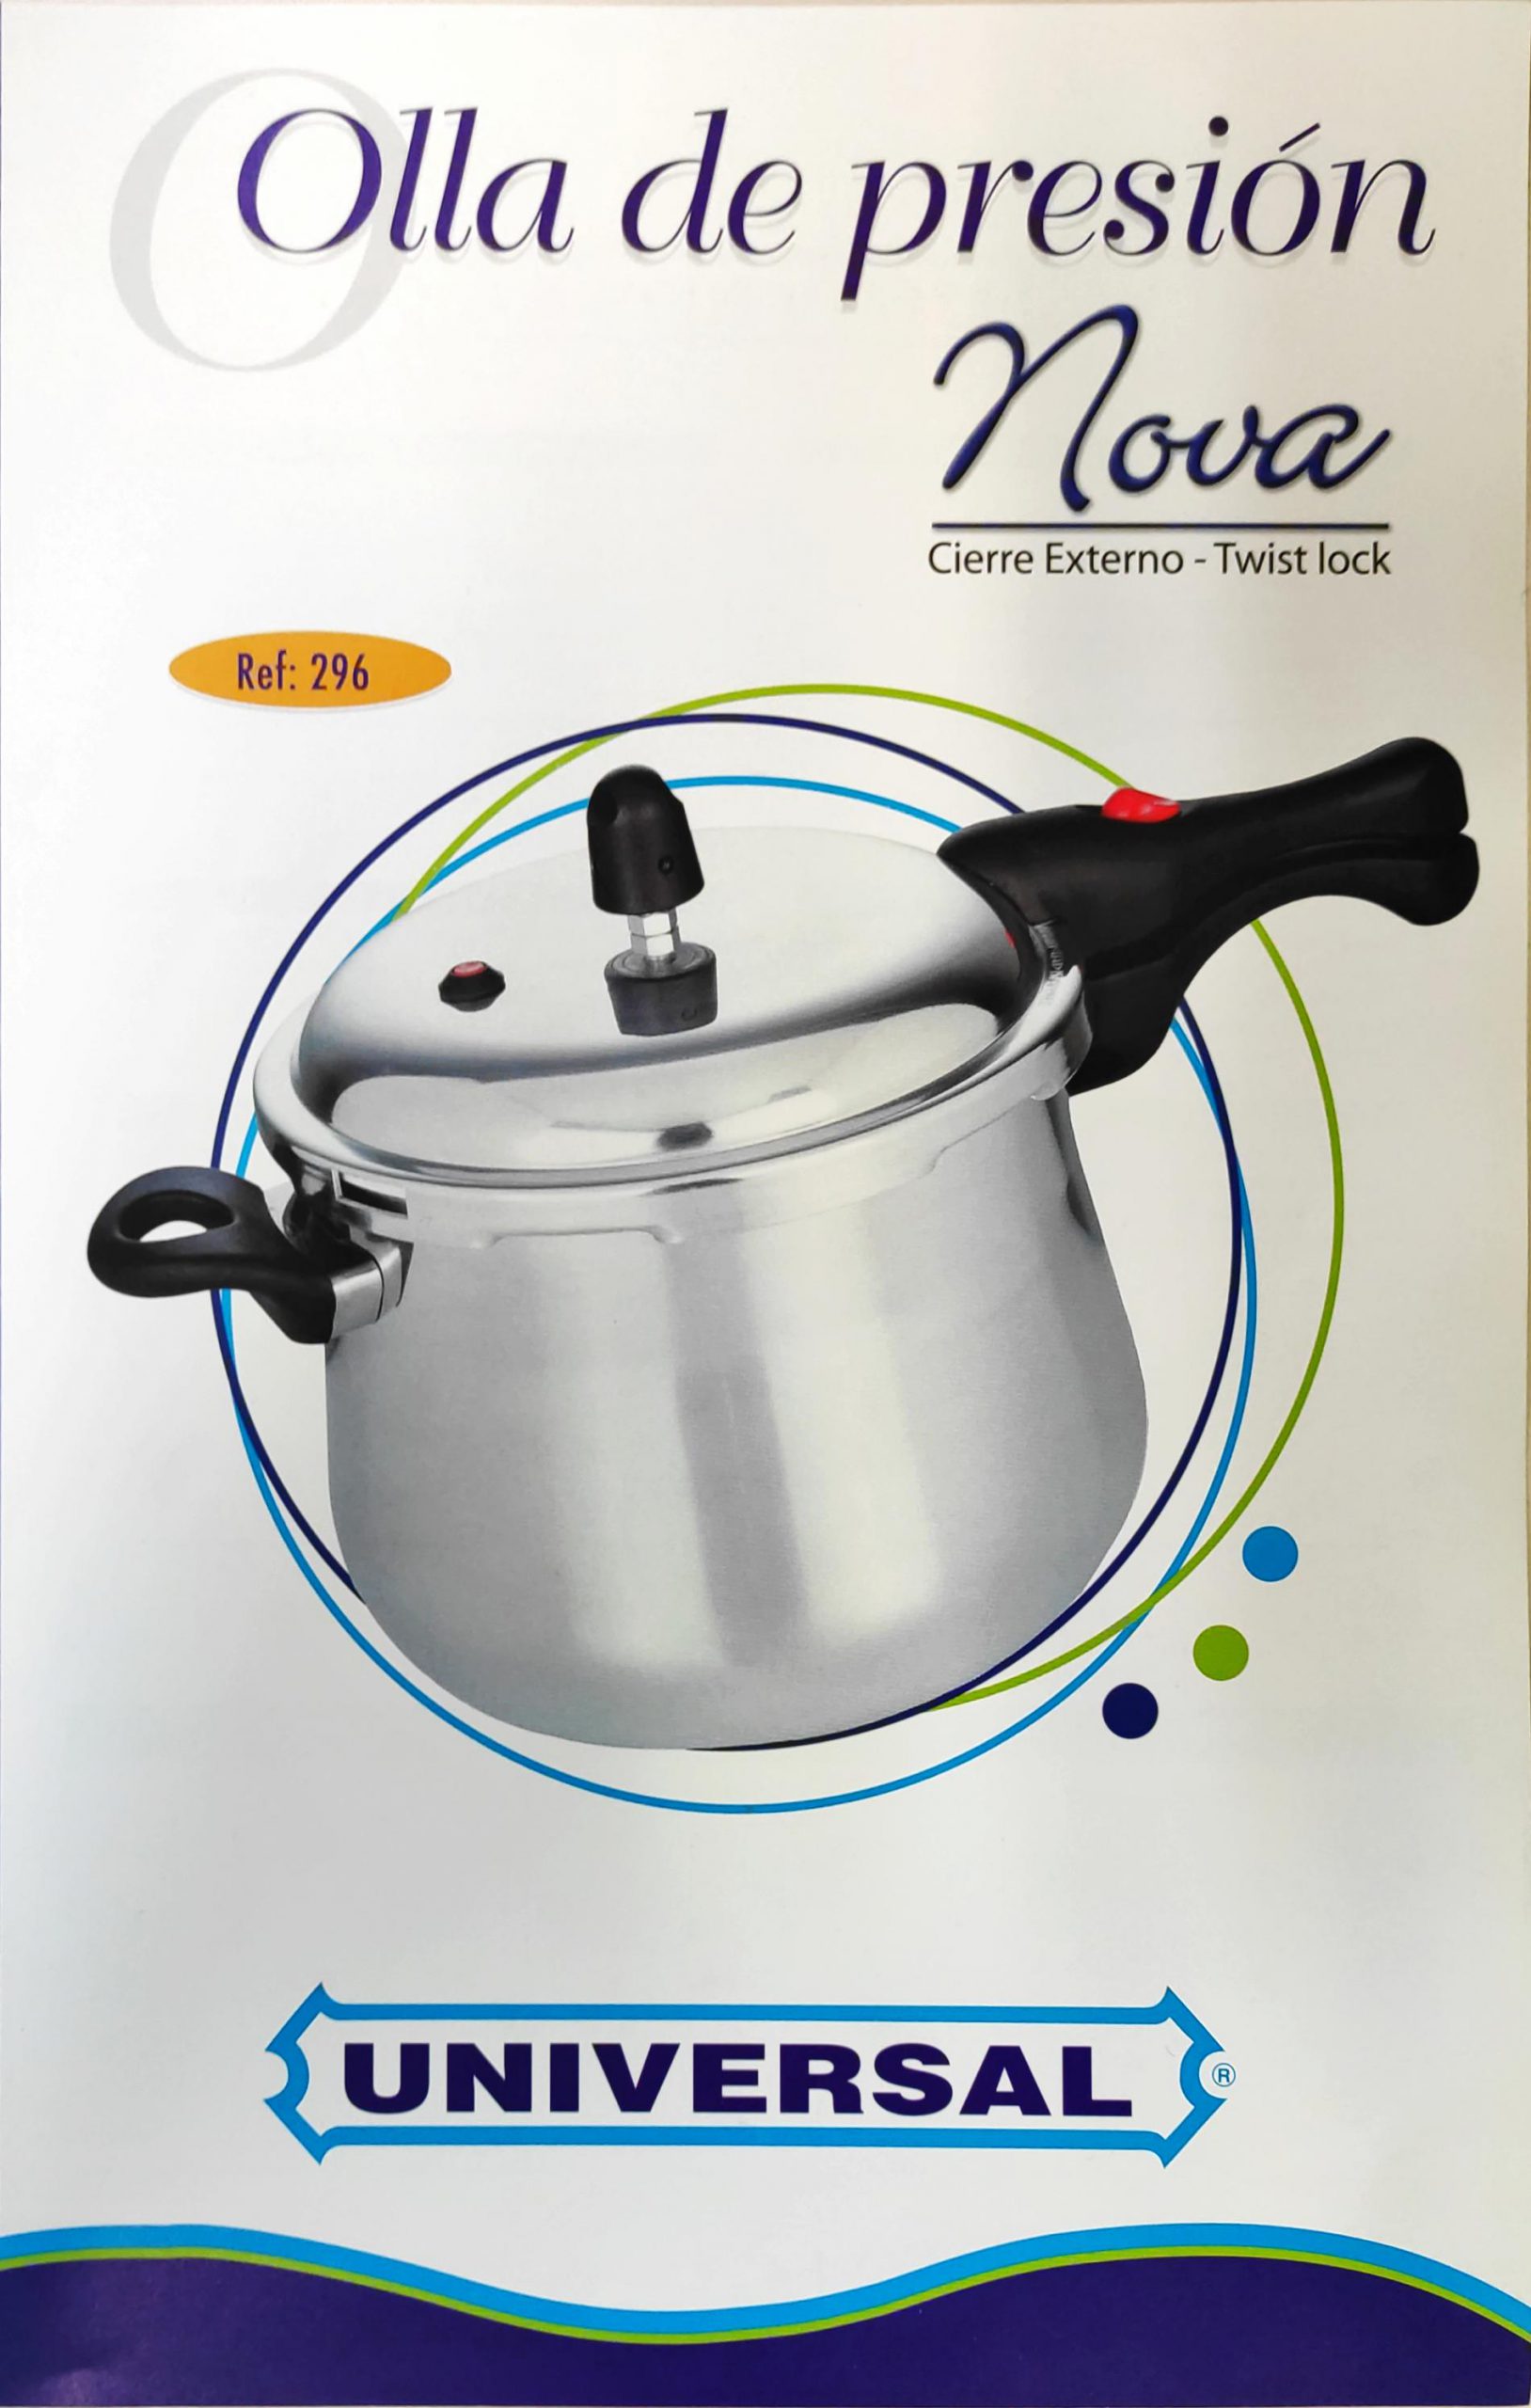 LANDERS Y CIA. S.A launches its New Design of External Closing Pot “NOVA”, once again reconfirming its leadership in Pressure Cookers.